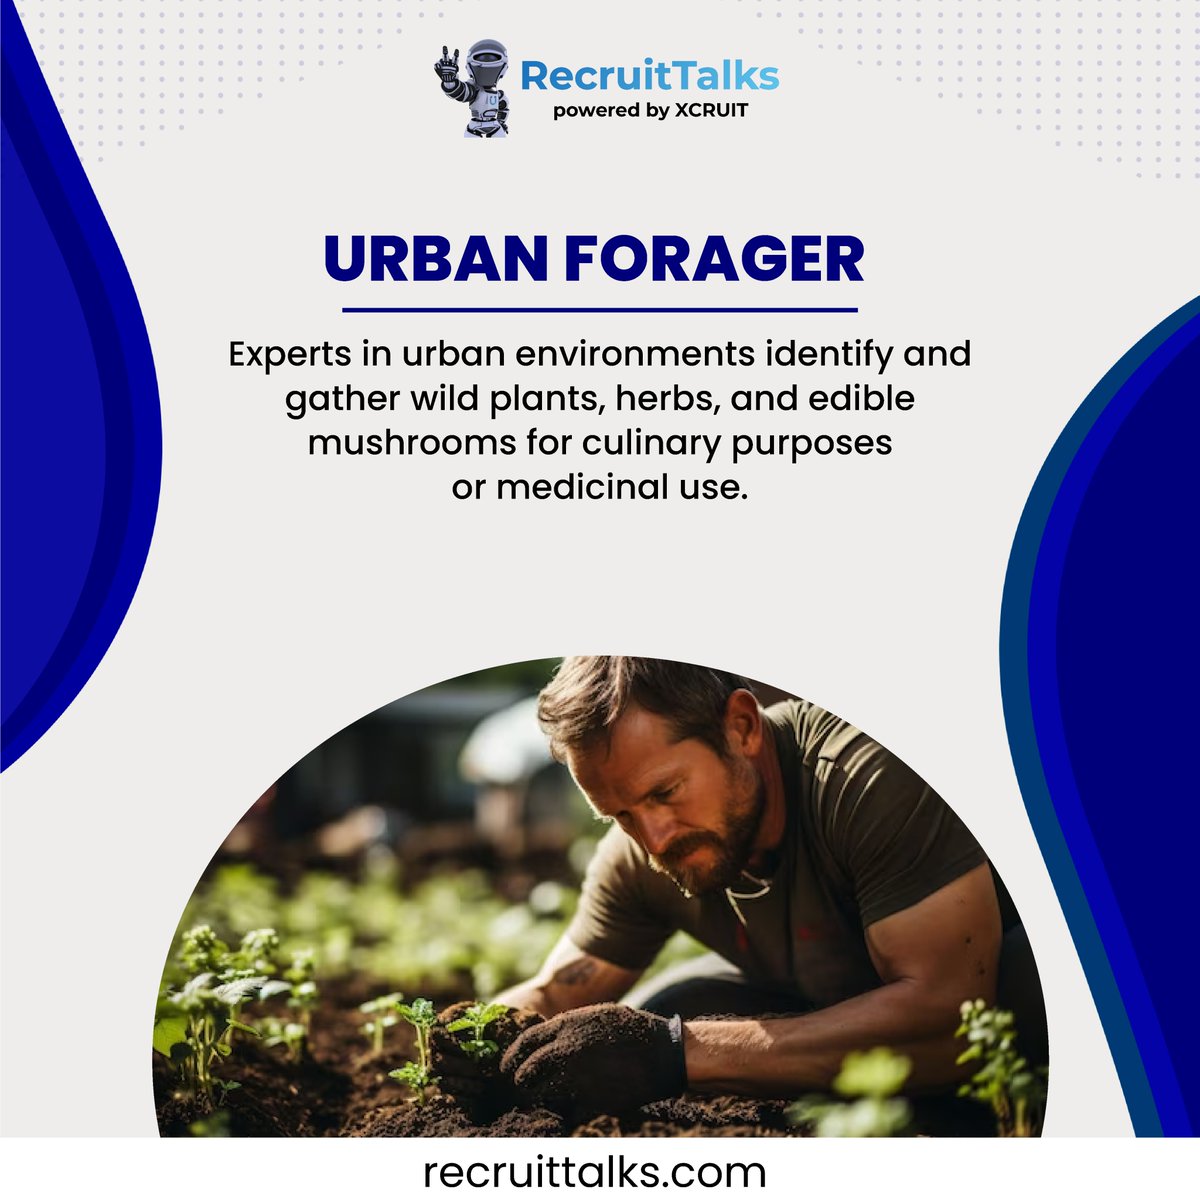 Where city streets meet forest trails: The captivating world of urban foraging!
.
.
#Recruitorr #IAmRecruitorr #RecruitResearch #UniqueJobs #InterestingFacts